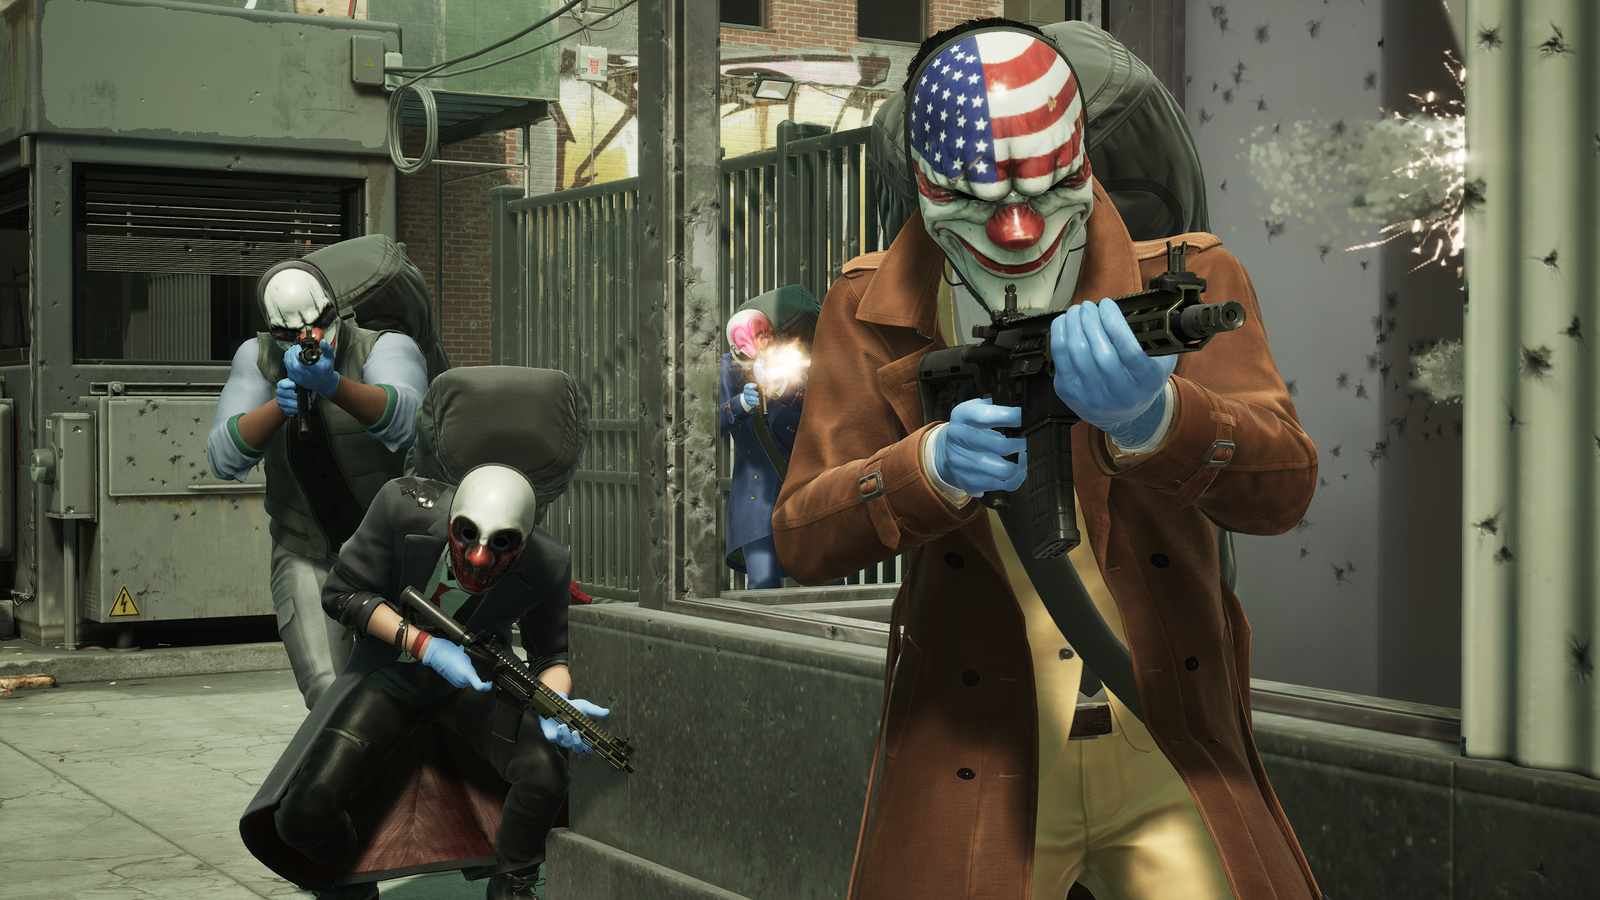 First Reviews of PayDay 3; Definitely Not a Big Hit